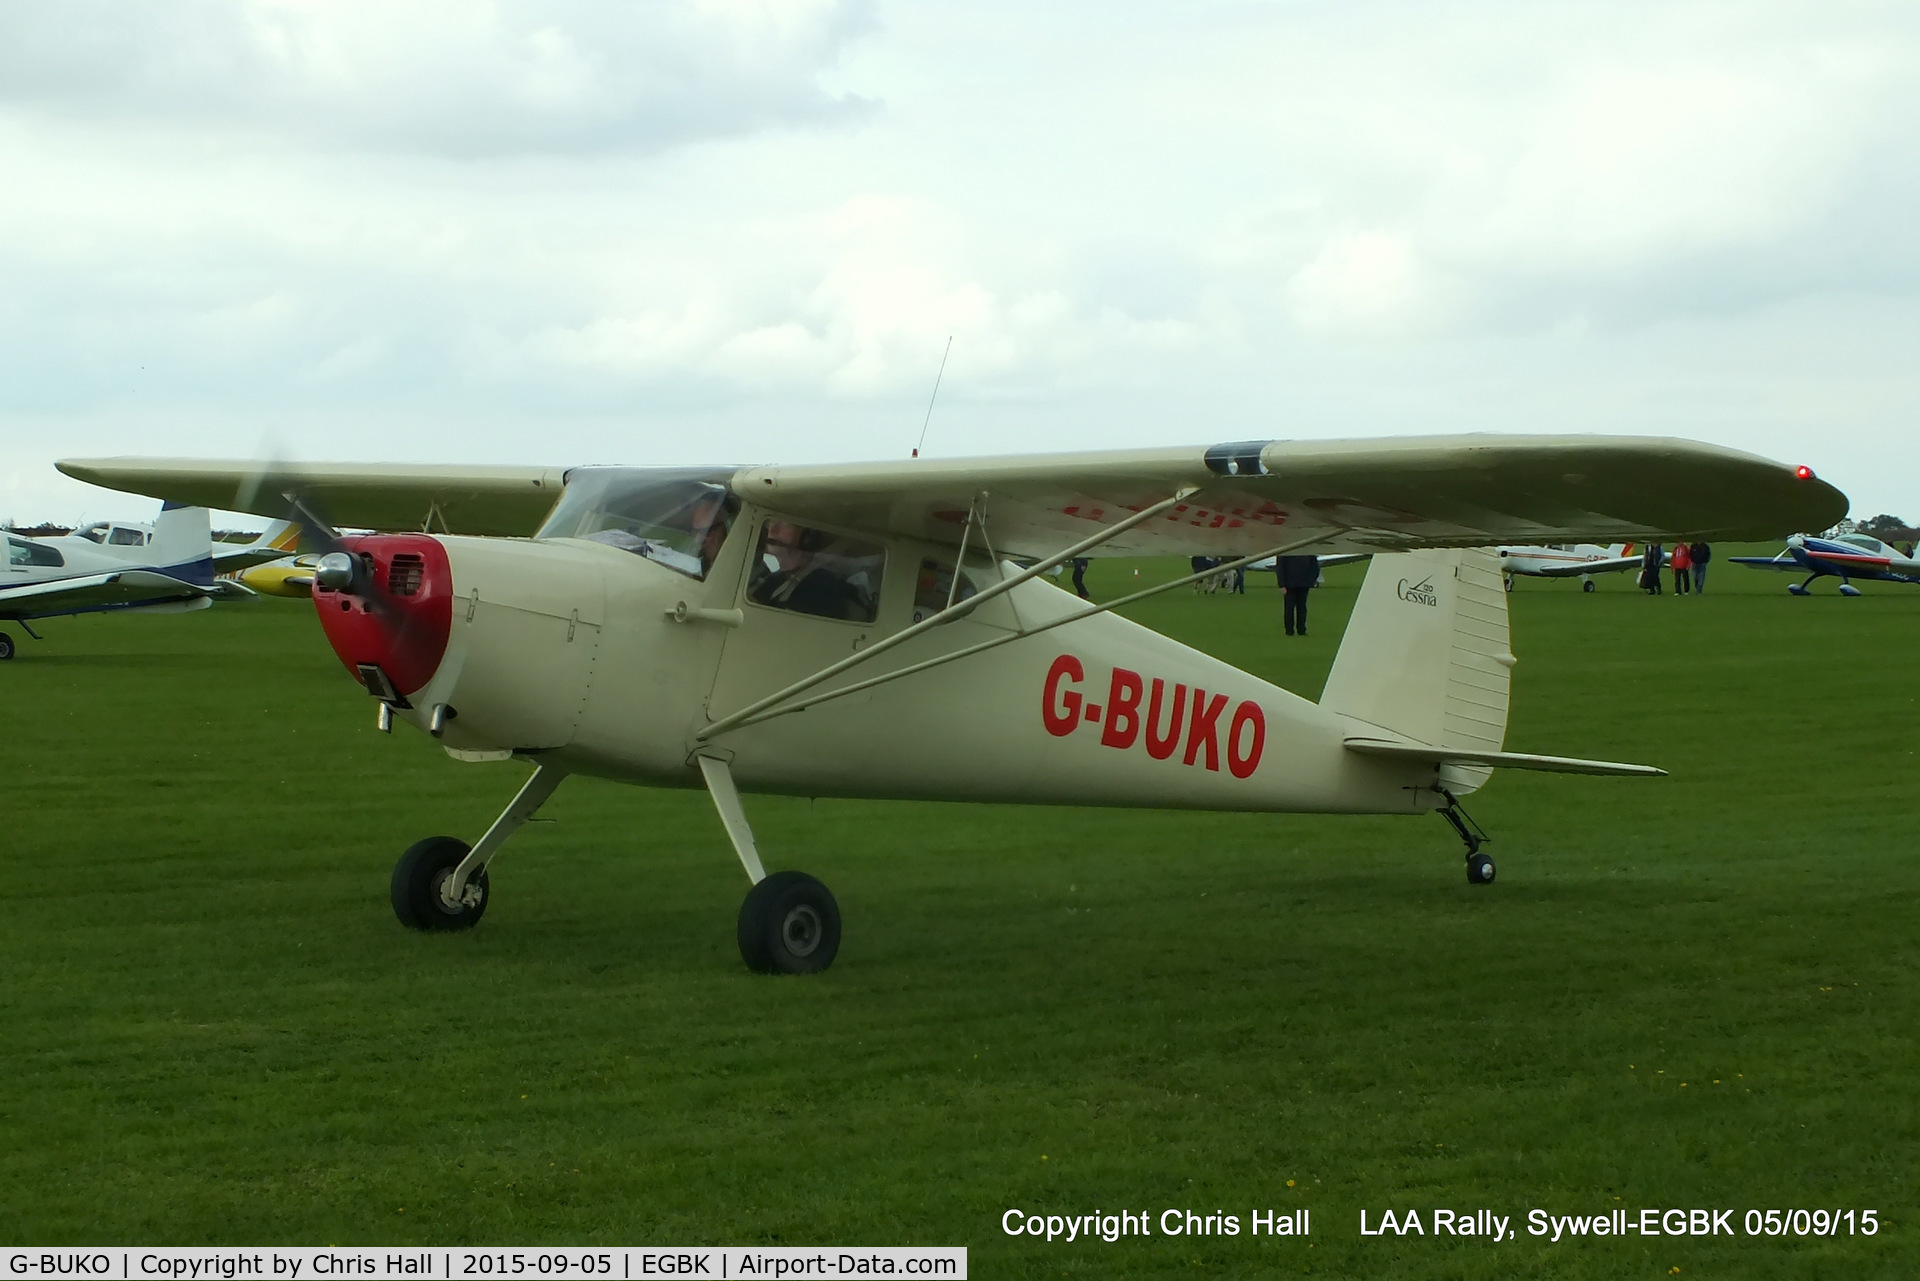 G-BUKO, 1947 Cessna 120 C/N 13089, at the LAA Rally 2015, Sywell